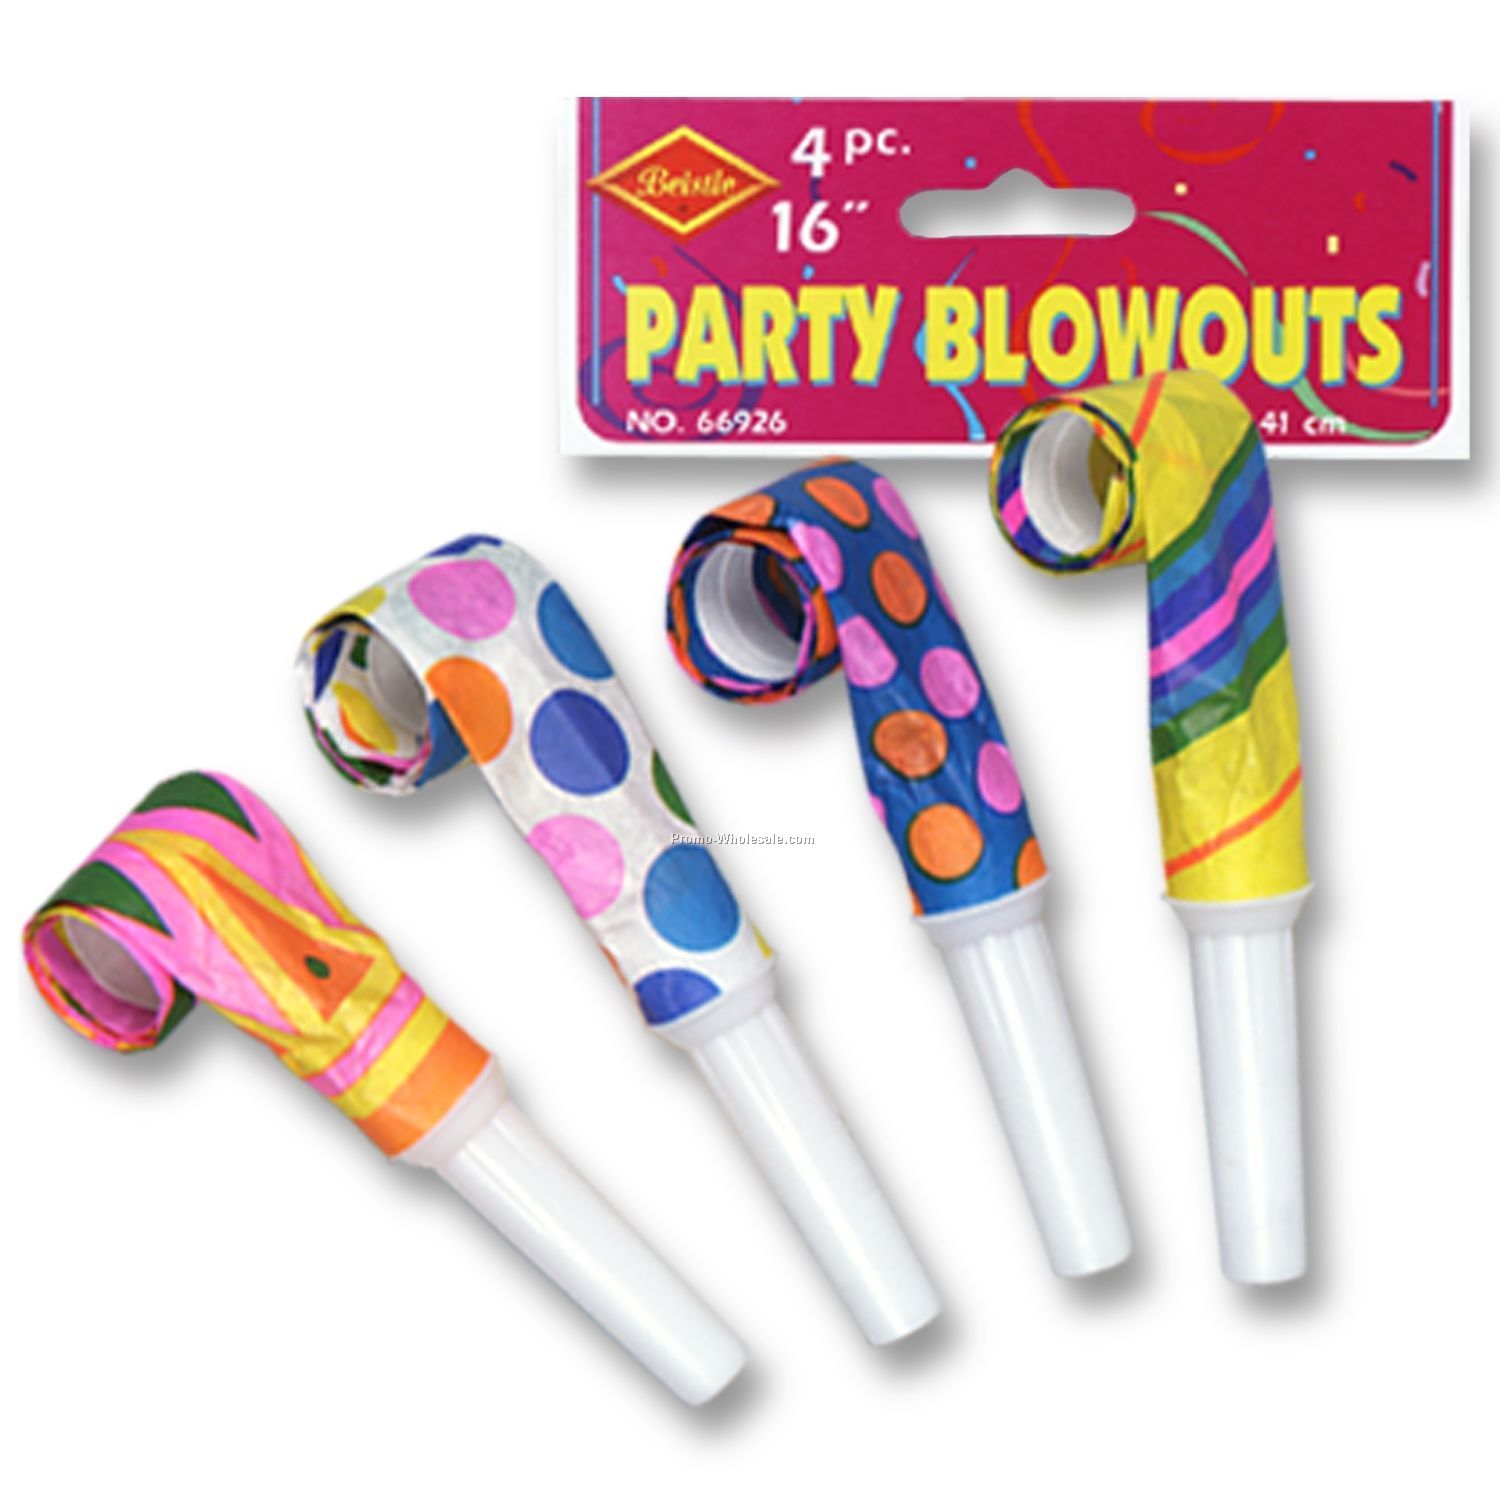 16" Packaged Multi Color Party Blowouts